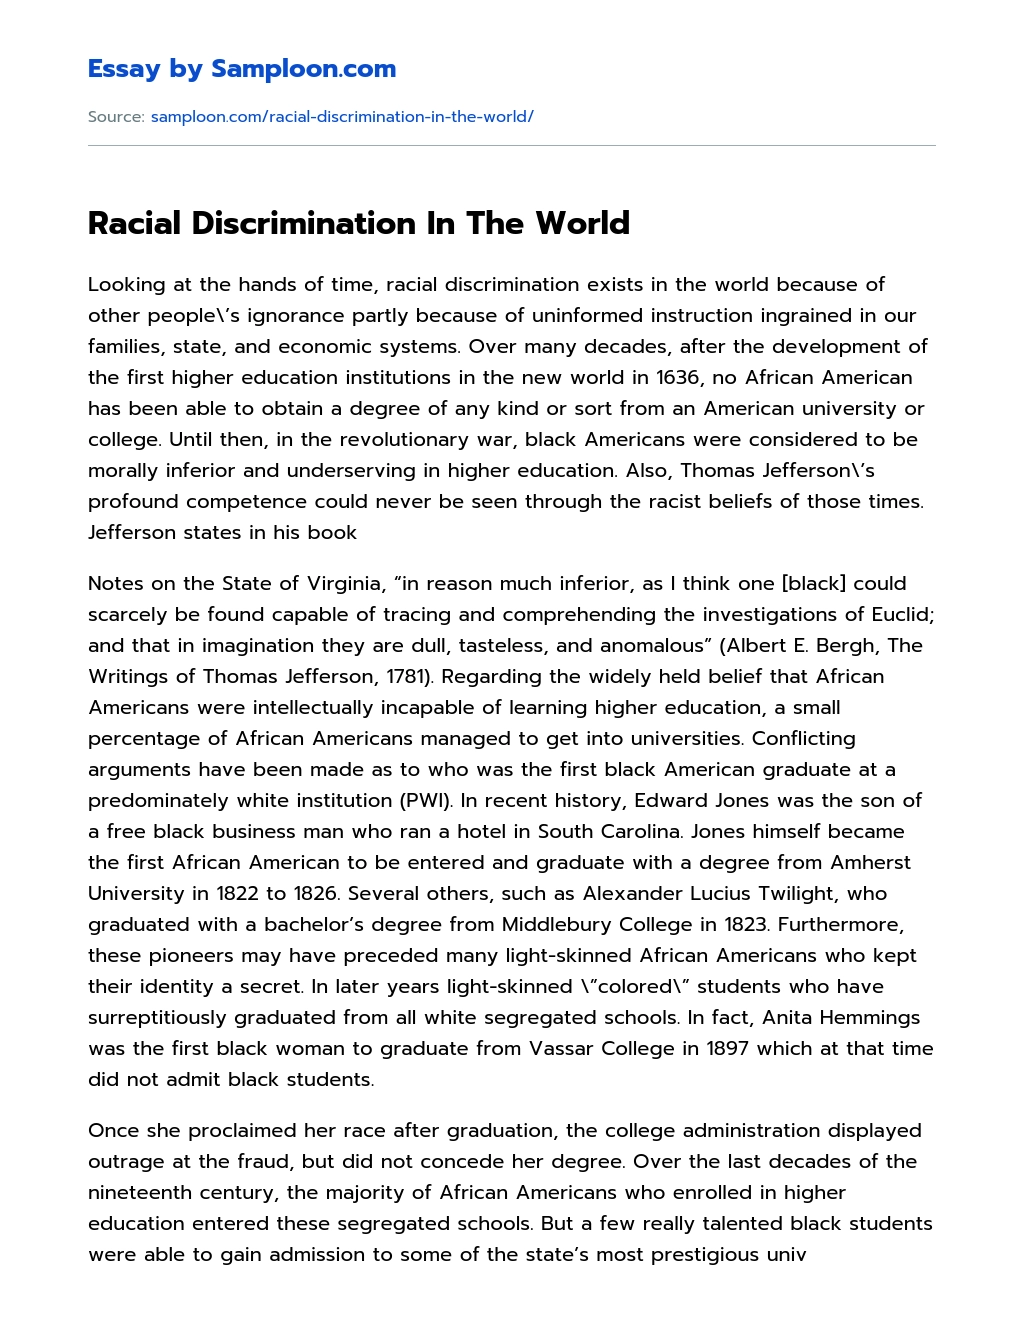 Racial Discrimination In The World essay